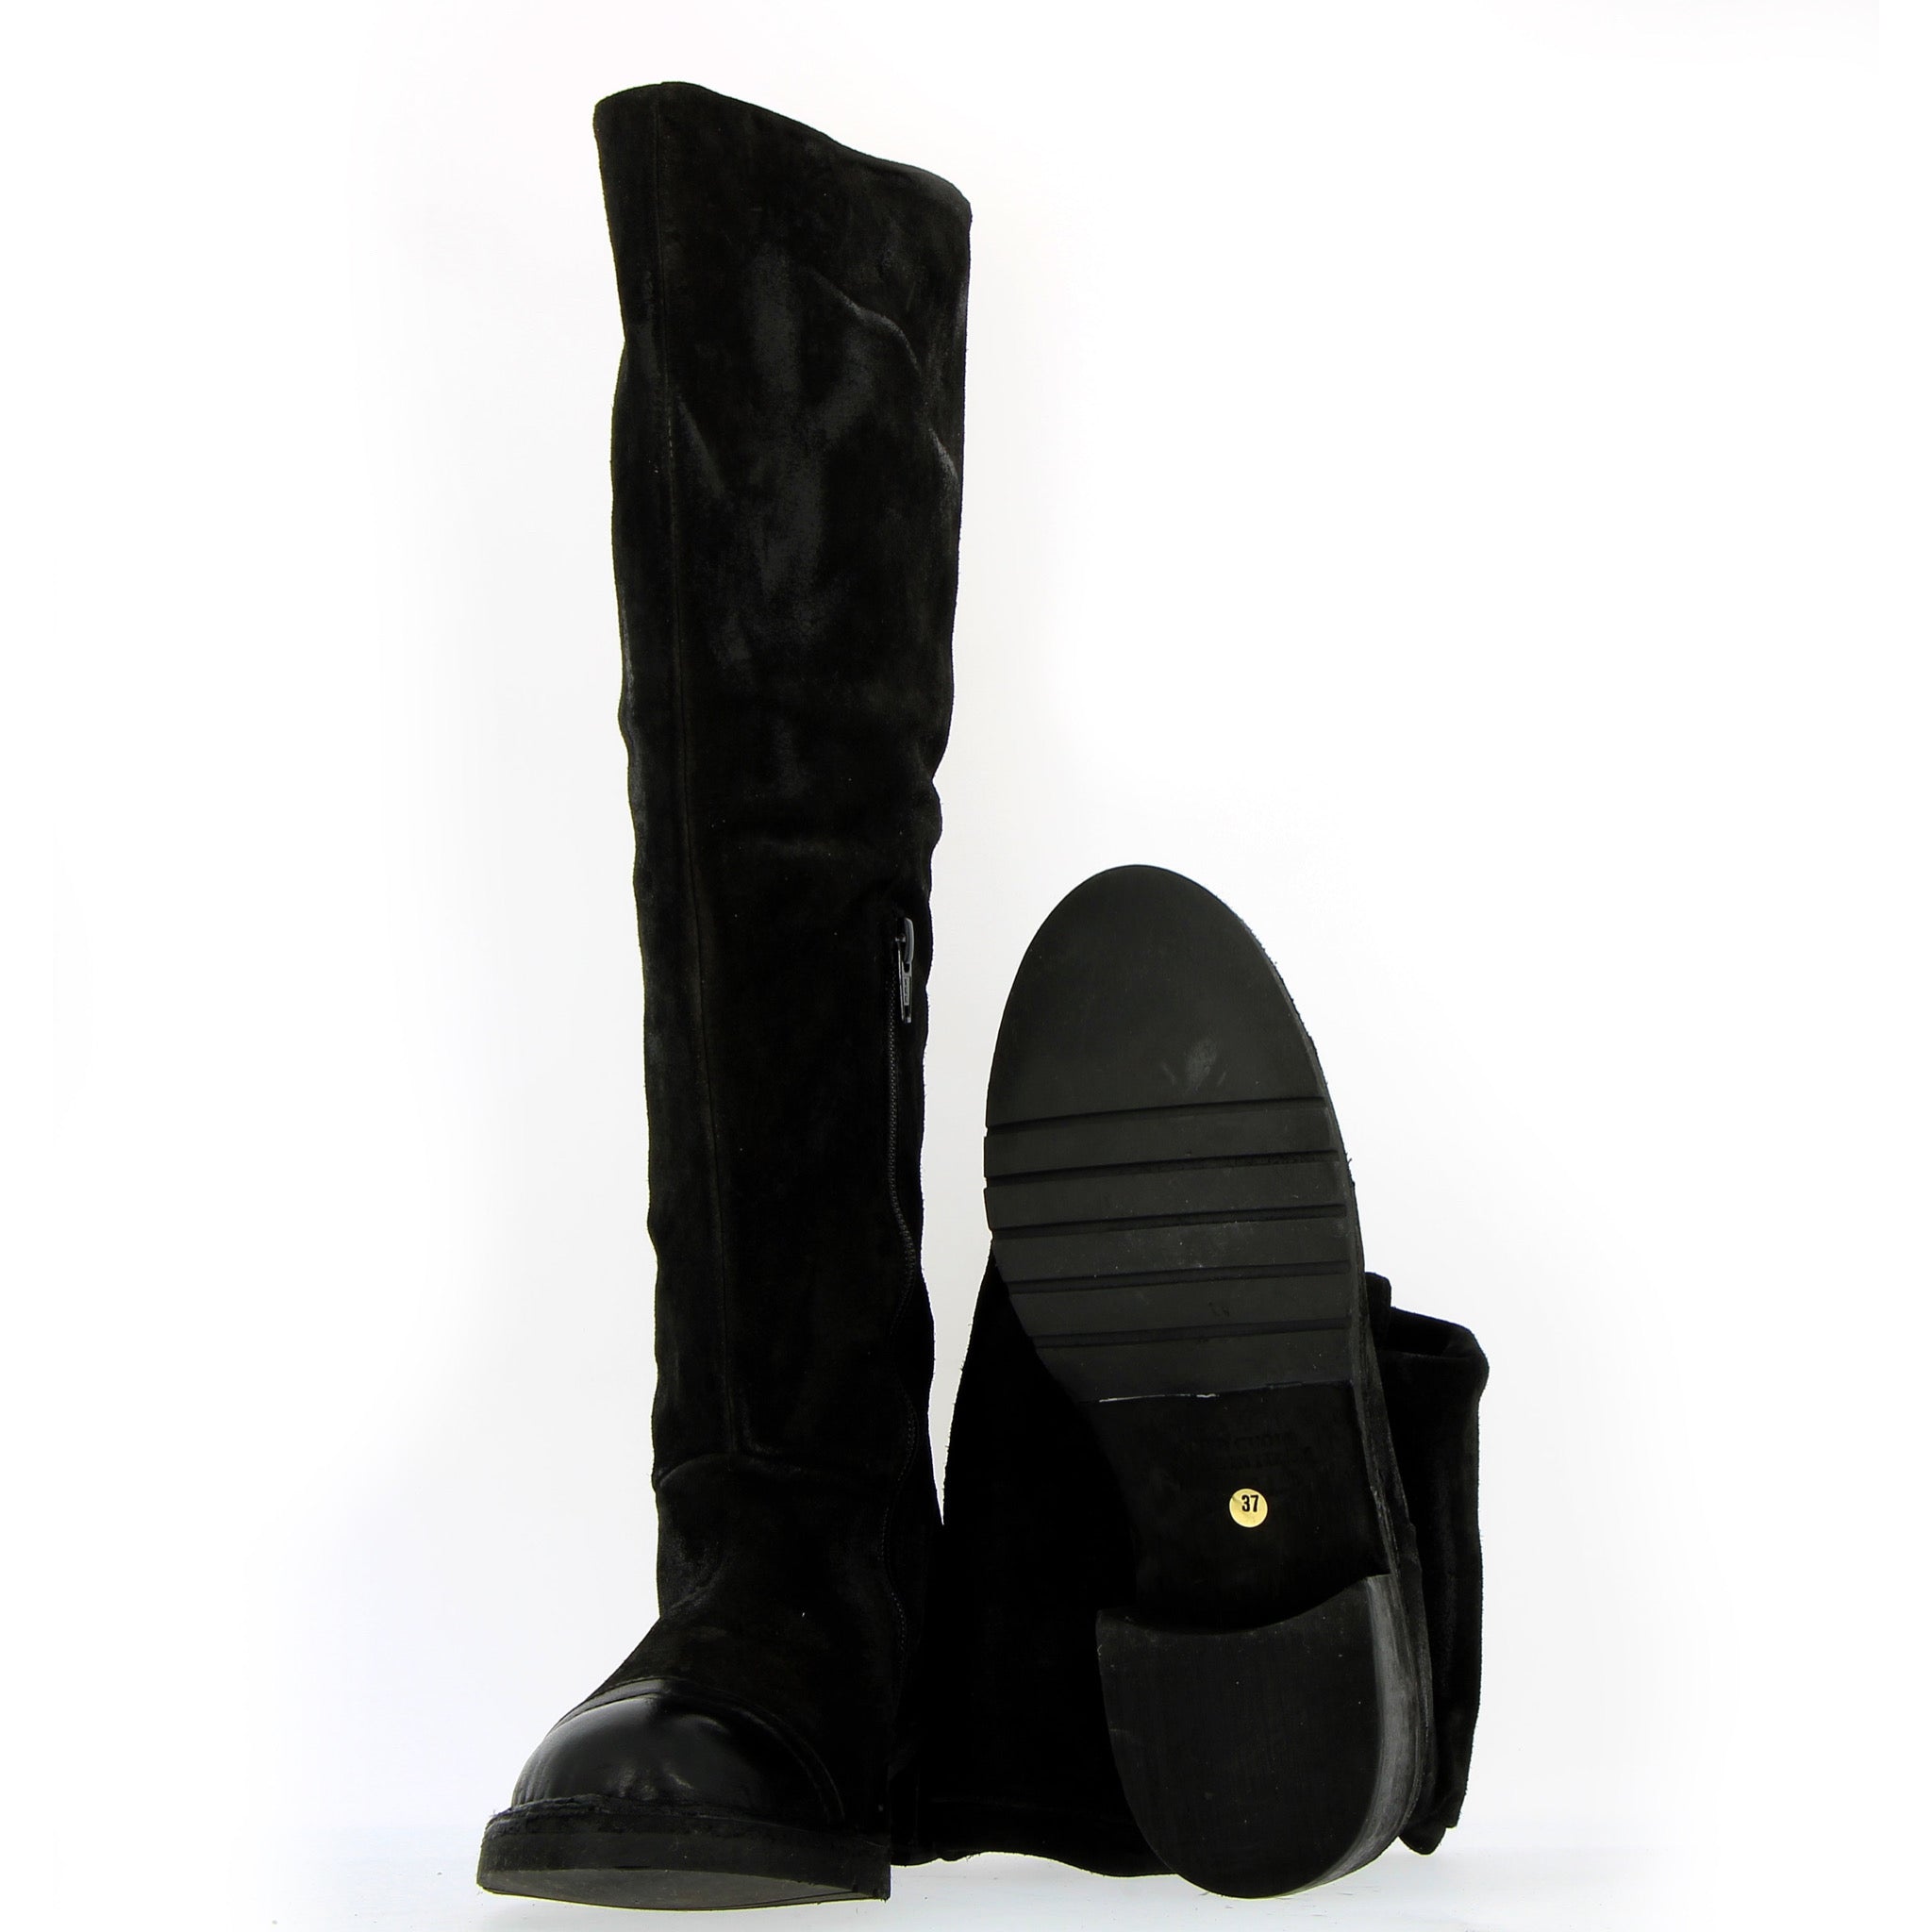 Boot in soft black suede with leather toe